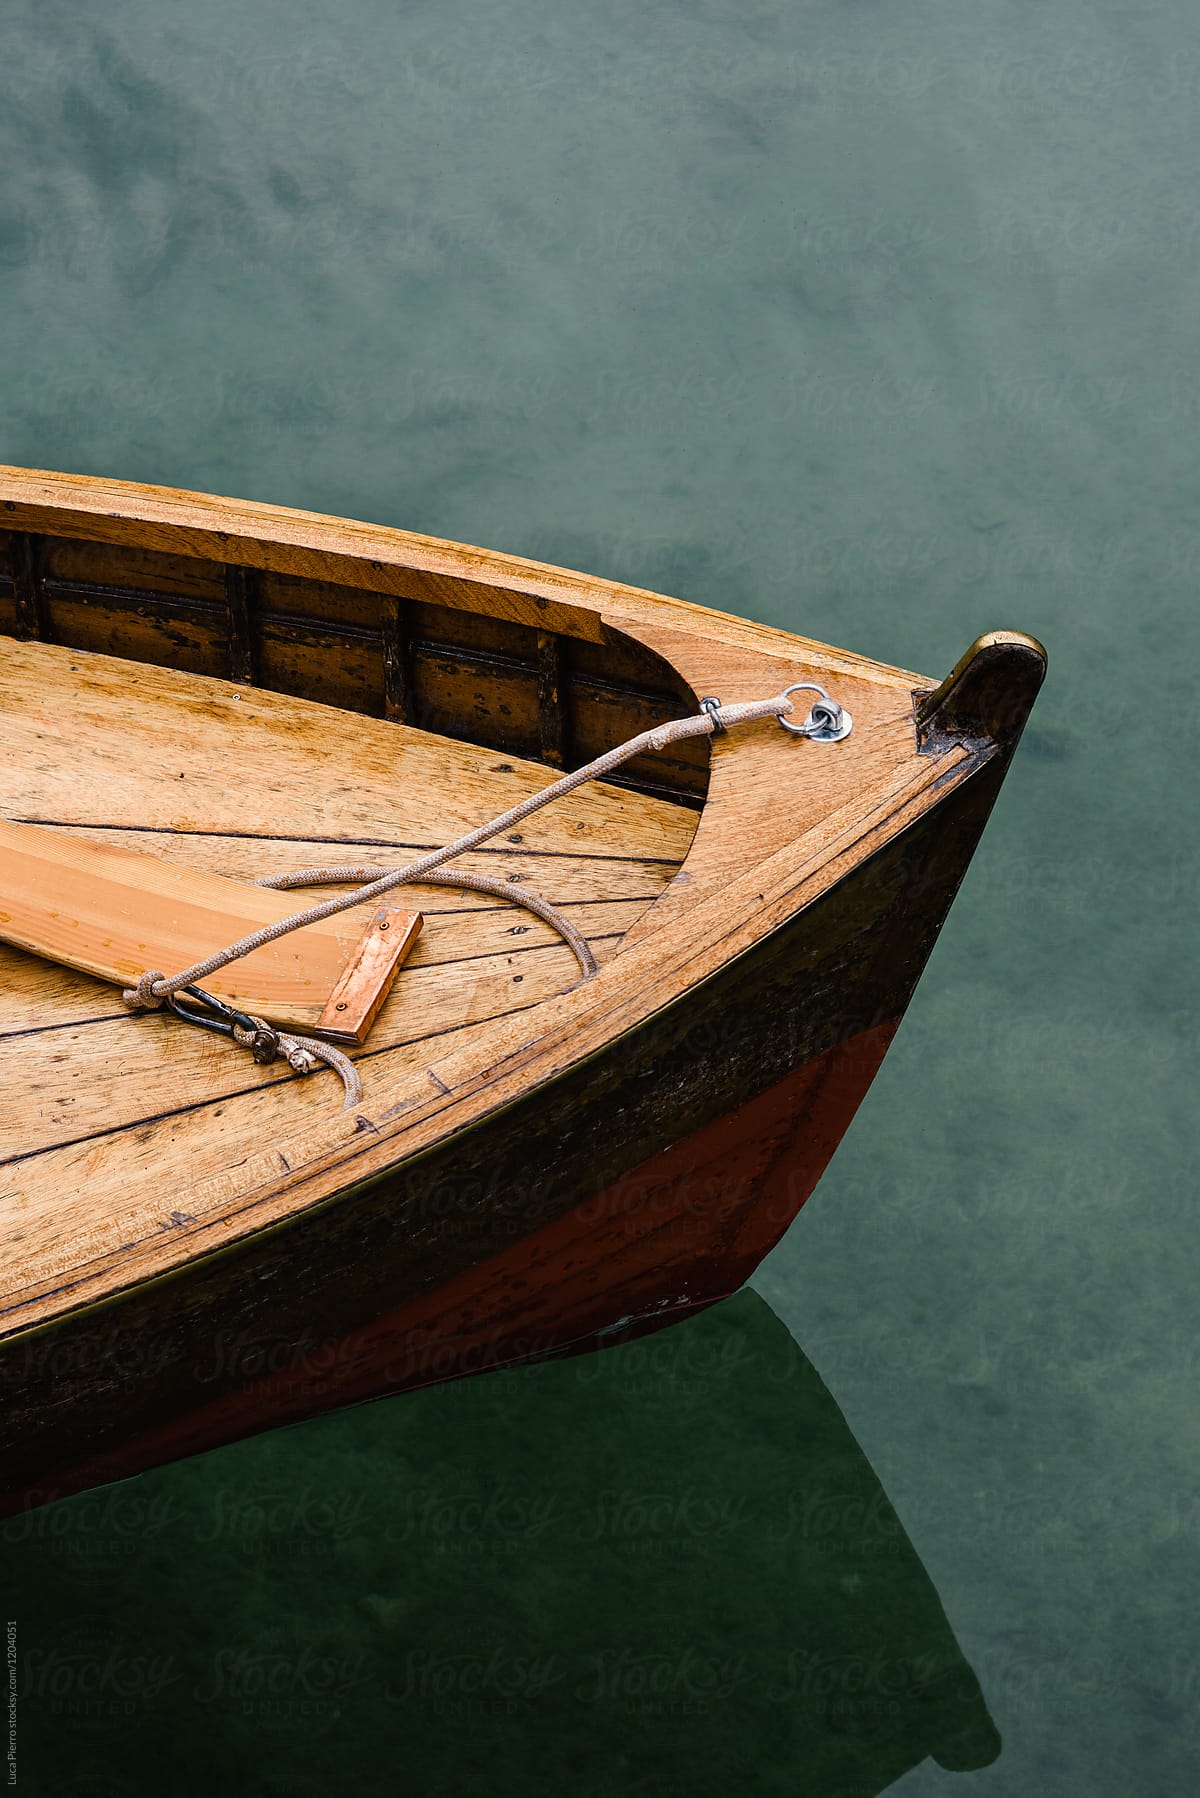 Closeup of the prow of a wooden boat in lake